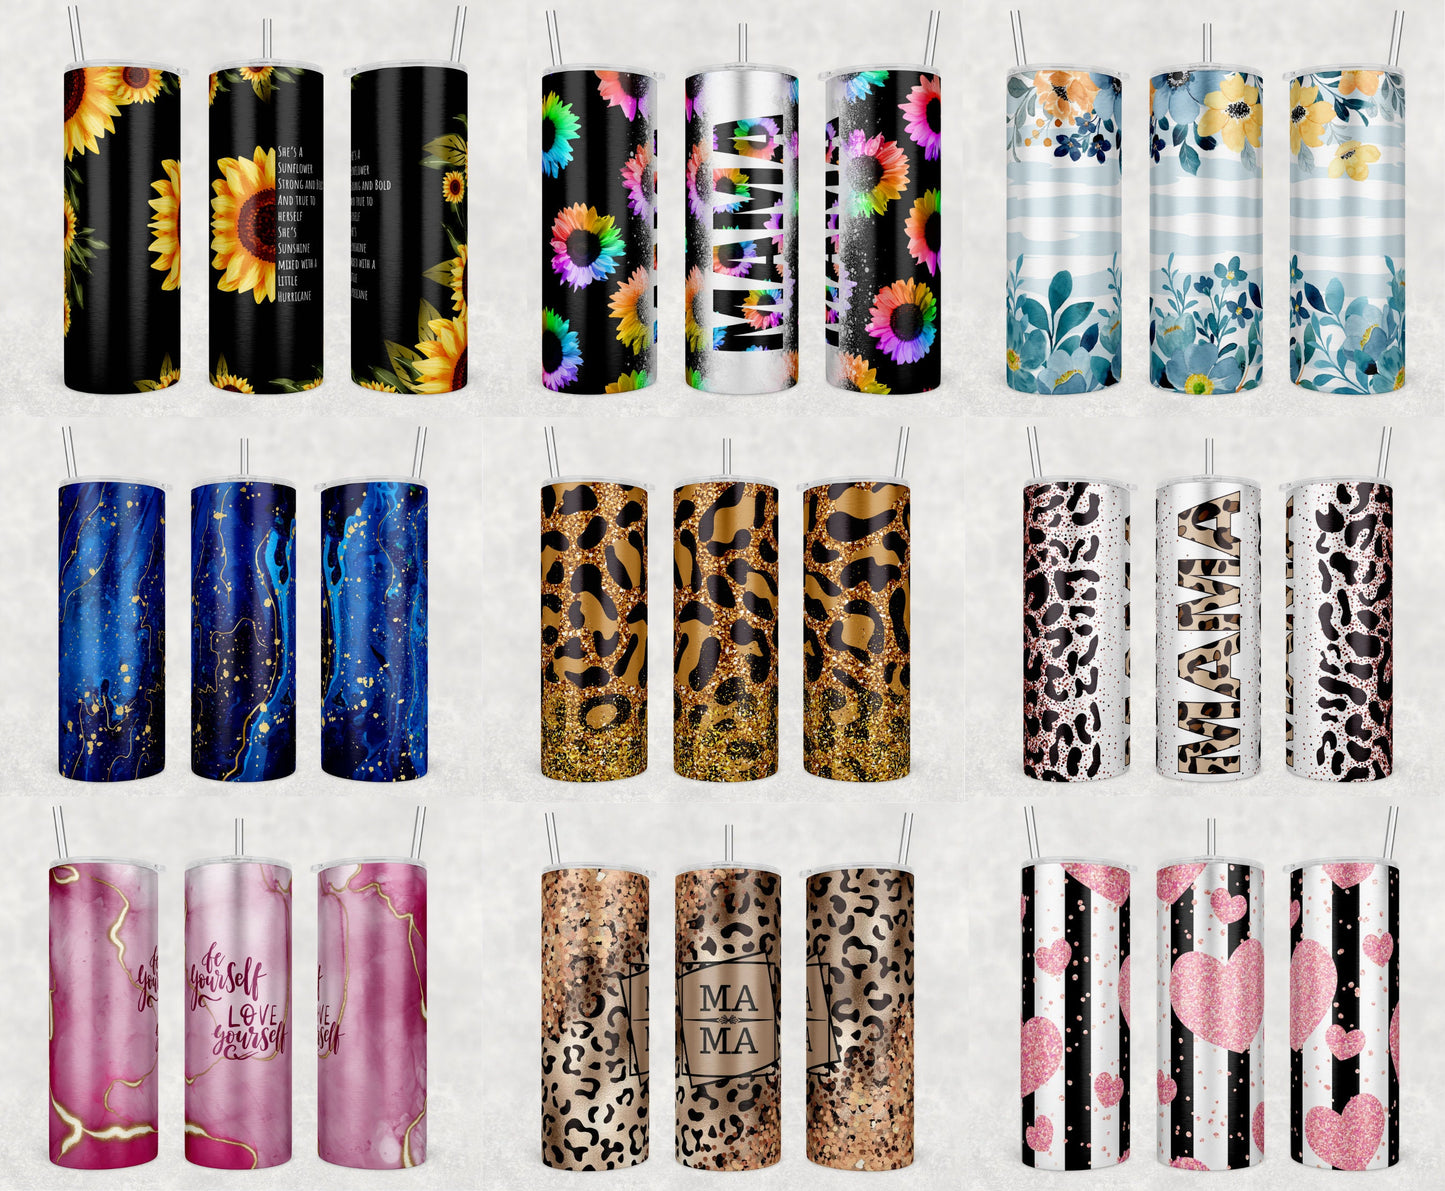 Pink Glitter Leopard Print Add Your Own Text Name Sublimation Tumbler Designs Cheetah Print - 20oz Skinny Tumbler Wraps Templates - PNG